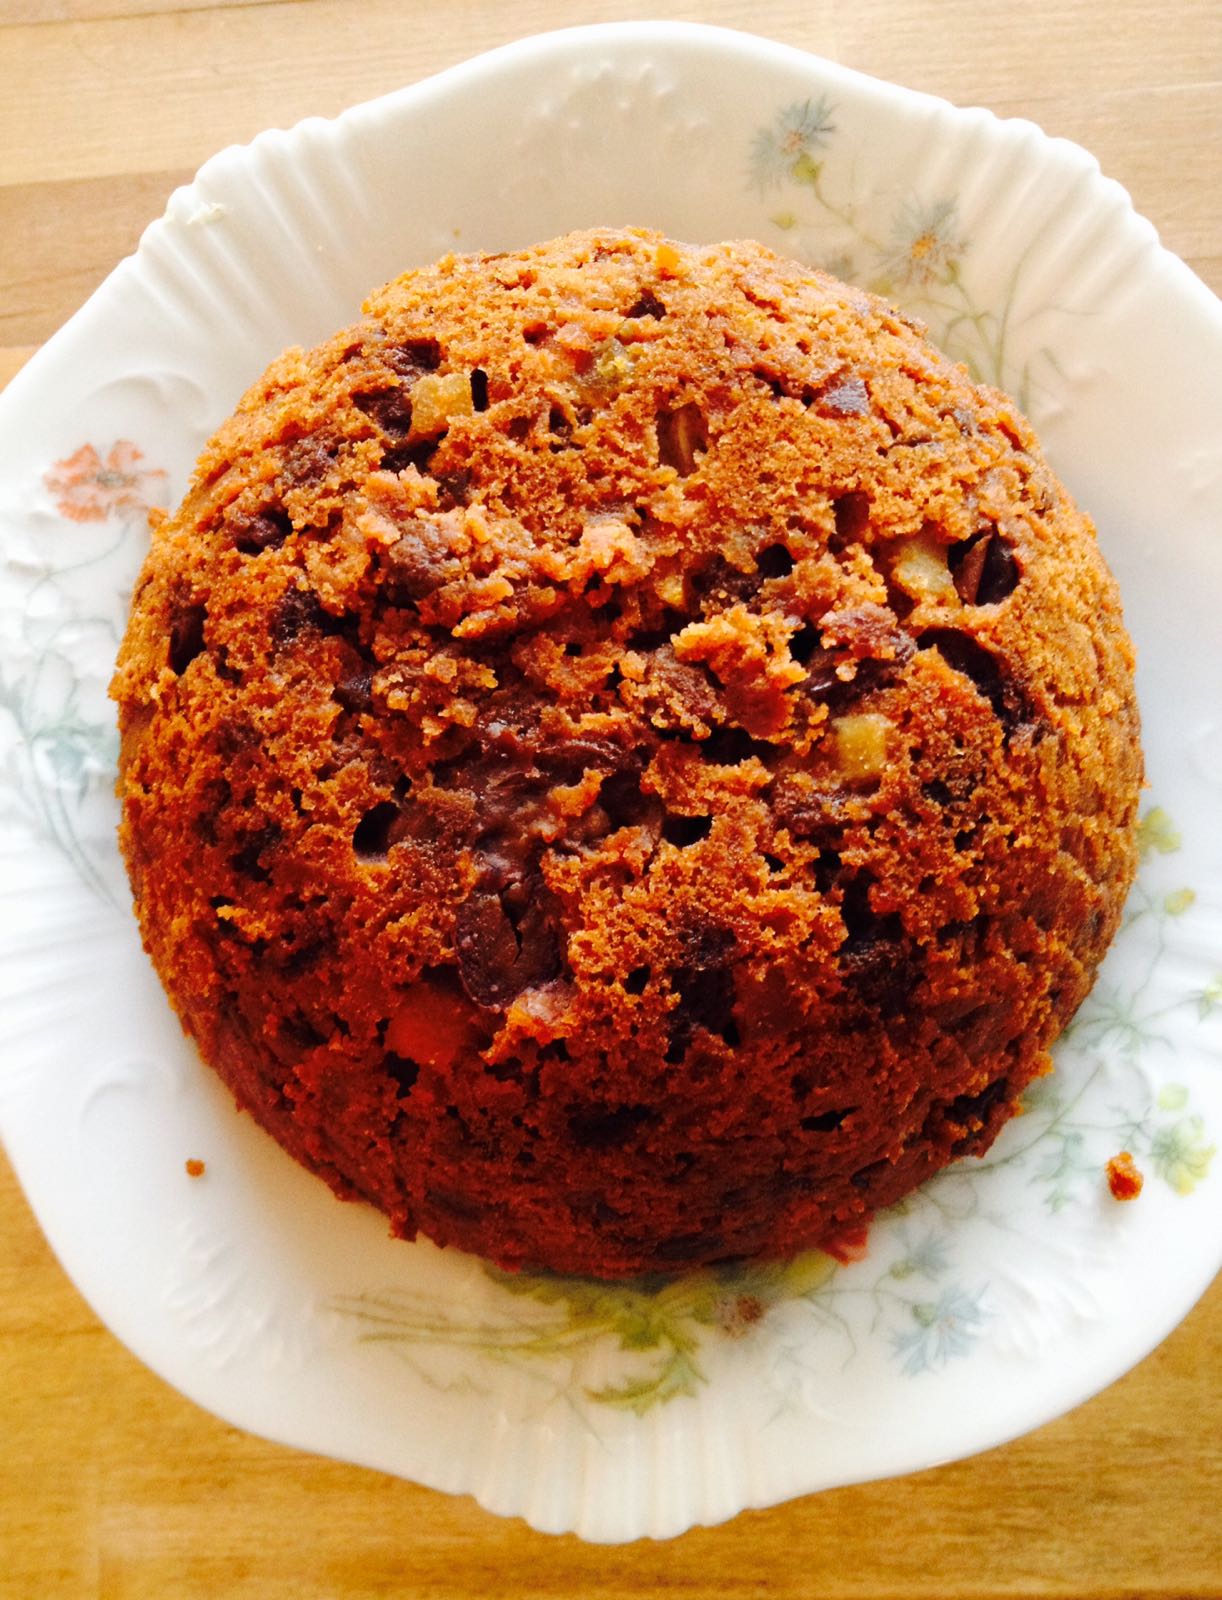 Gluten free Christmas pudding – Easy and gluten free